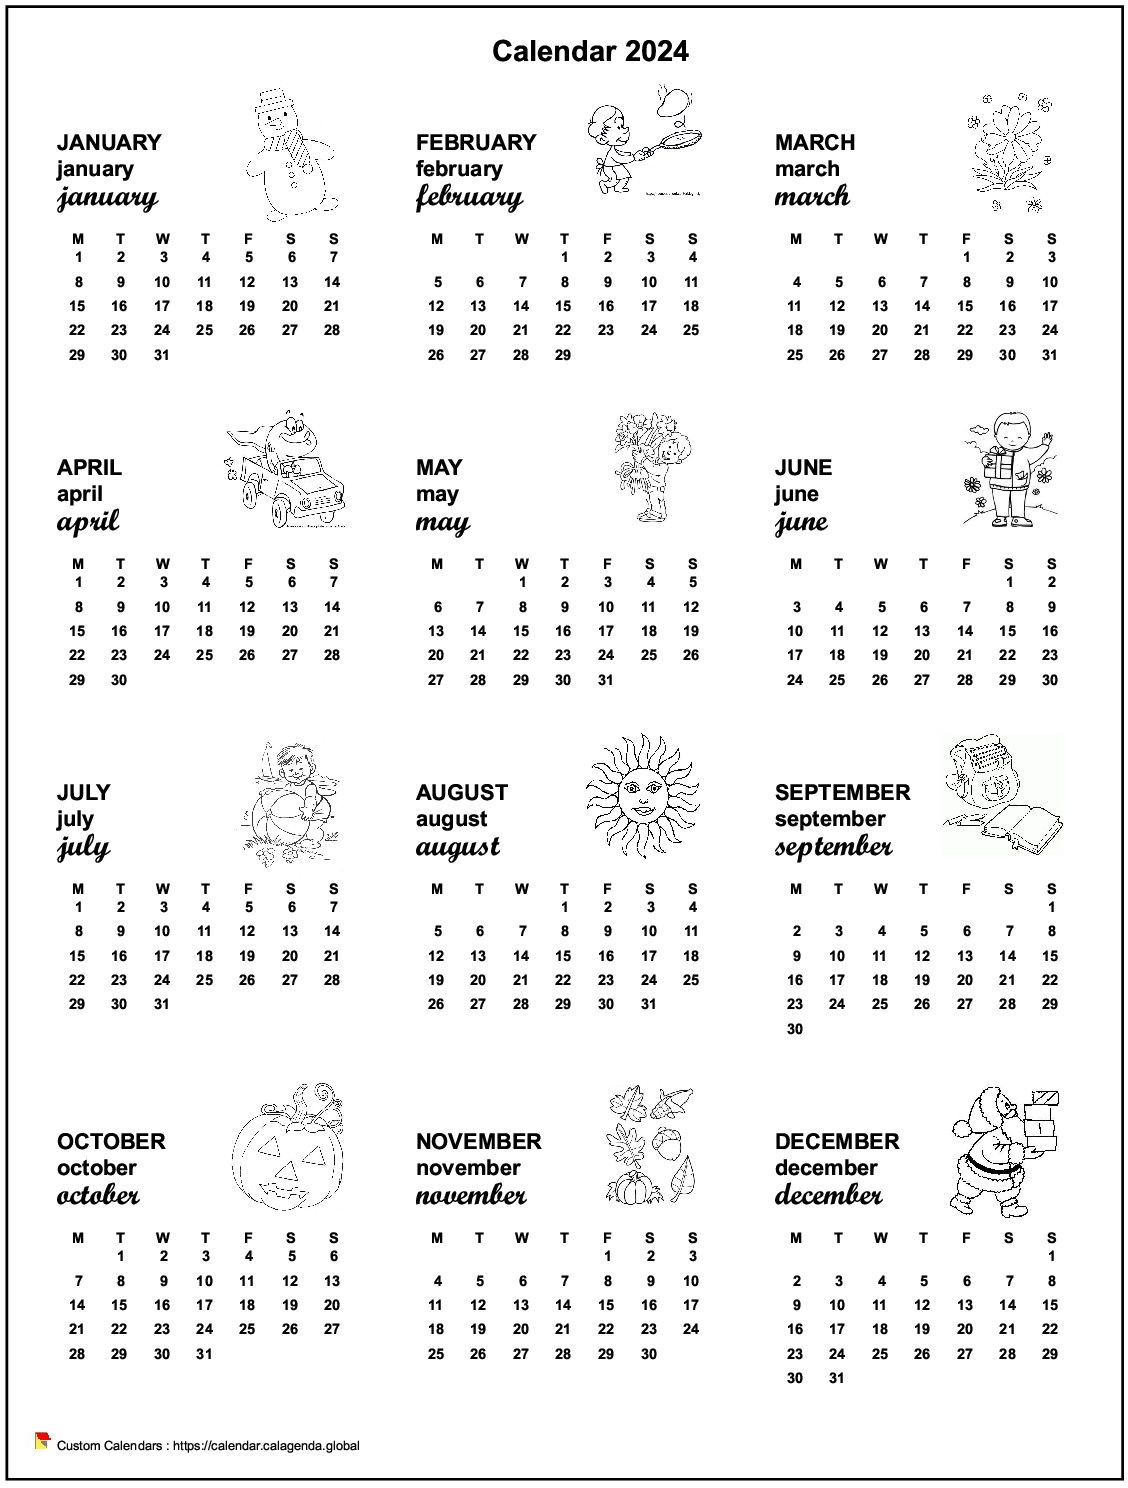 Calendar 2042 annual maternal and primary school